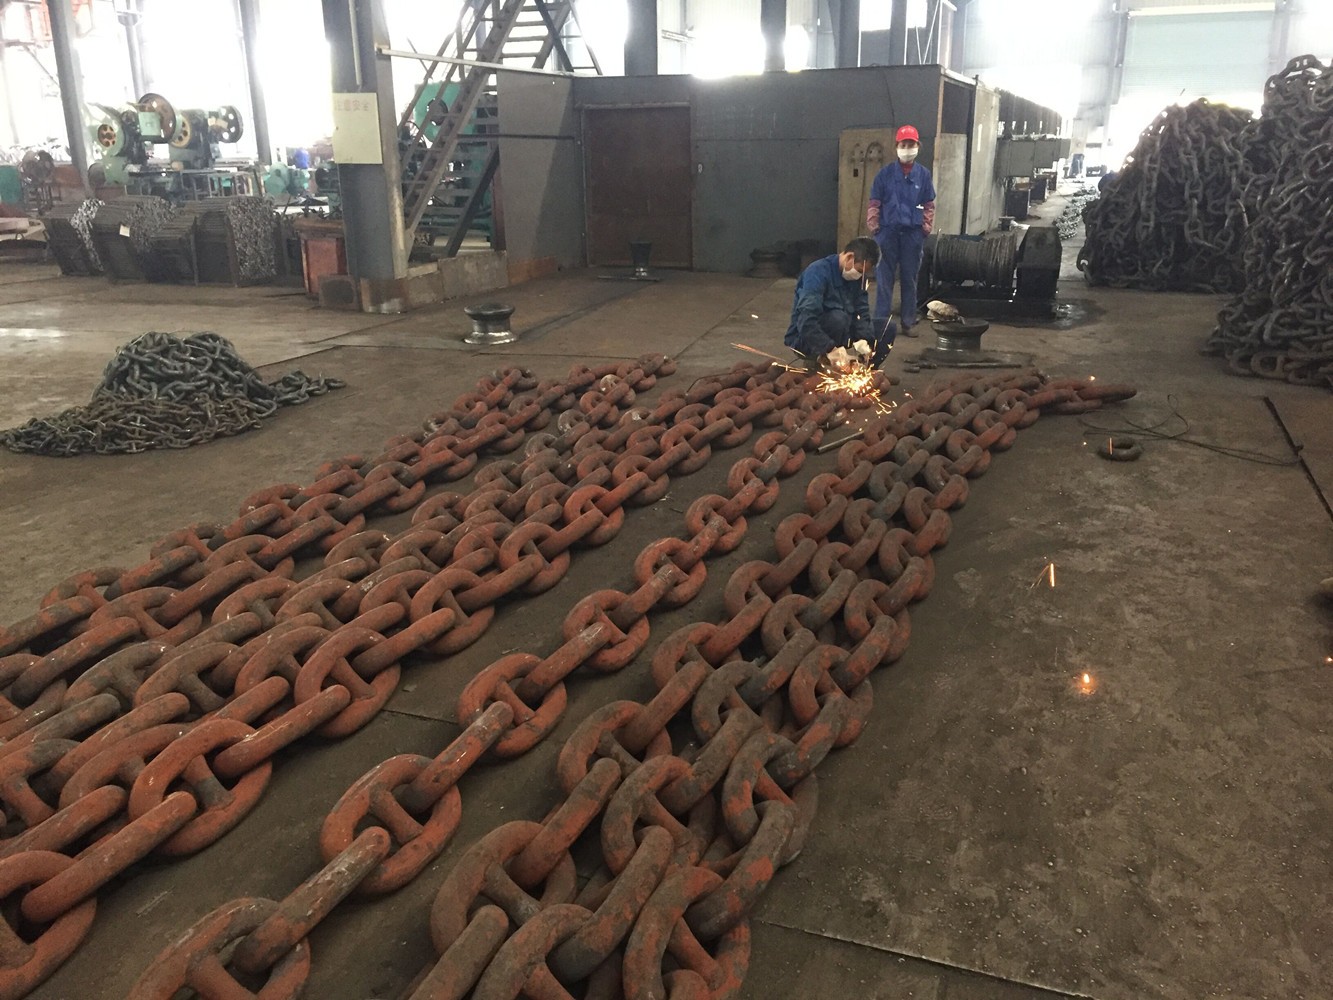 Studlink anchor chain ship grade 3 Manufacturers, Studlink anchor chain ship grade 3 Factory, Supply Studlink anchor chain ship grade 3